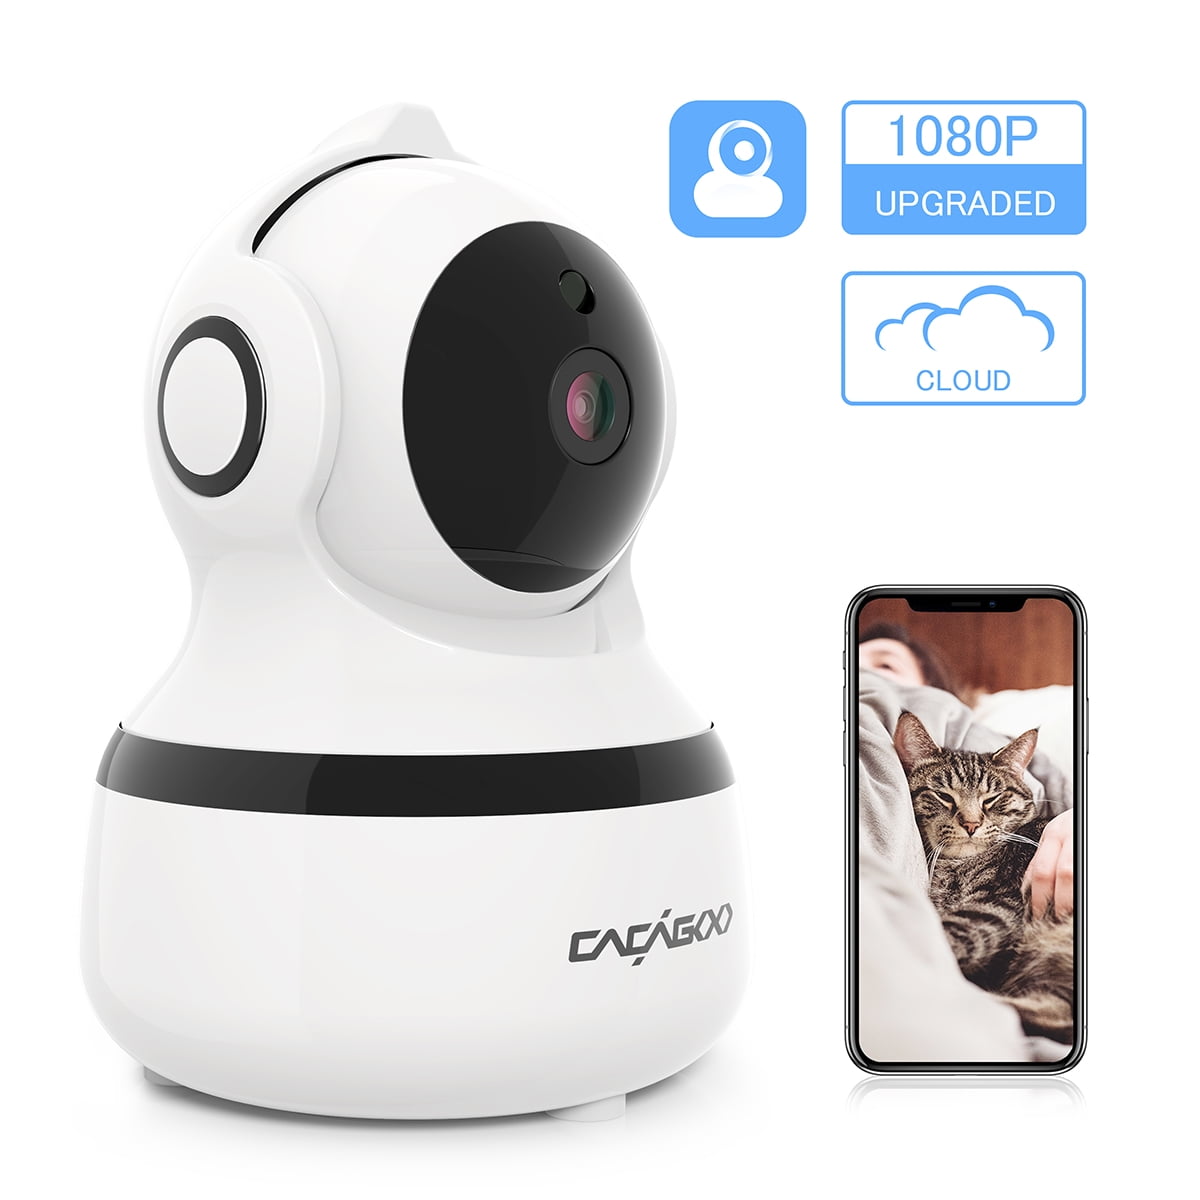 Security Camera Wireless WiFi Home Indoor Camera zhiroad 1080P HD 355° Nanny Camera Pan/Tilt/Zoom with Night Vision Remote Motion Detection with Cloud Storage 2-Way Audio for Baby/Elder/Pet 